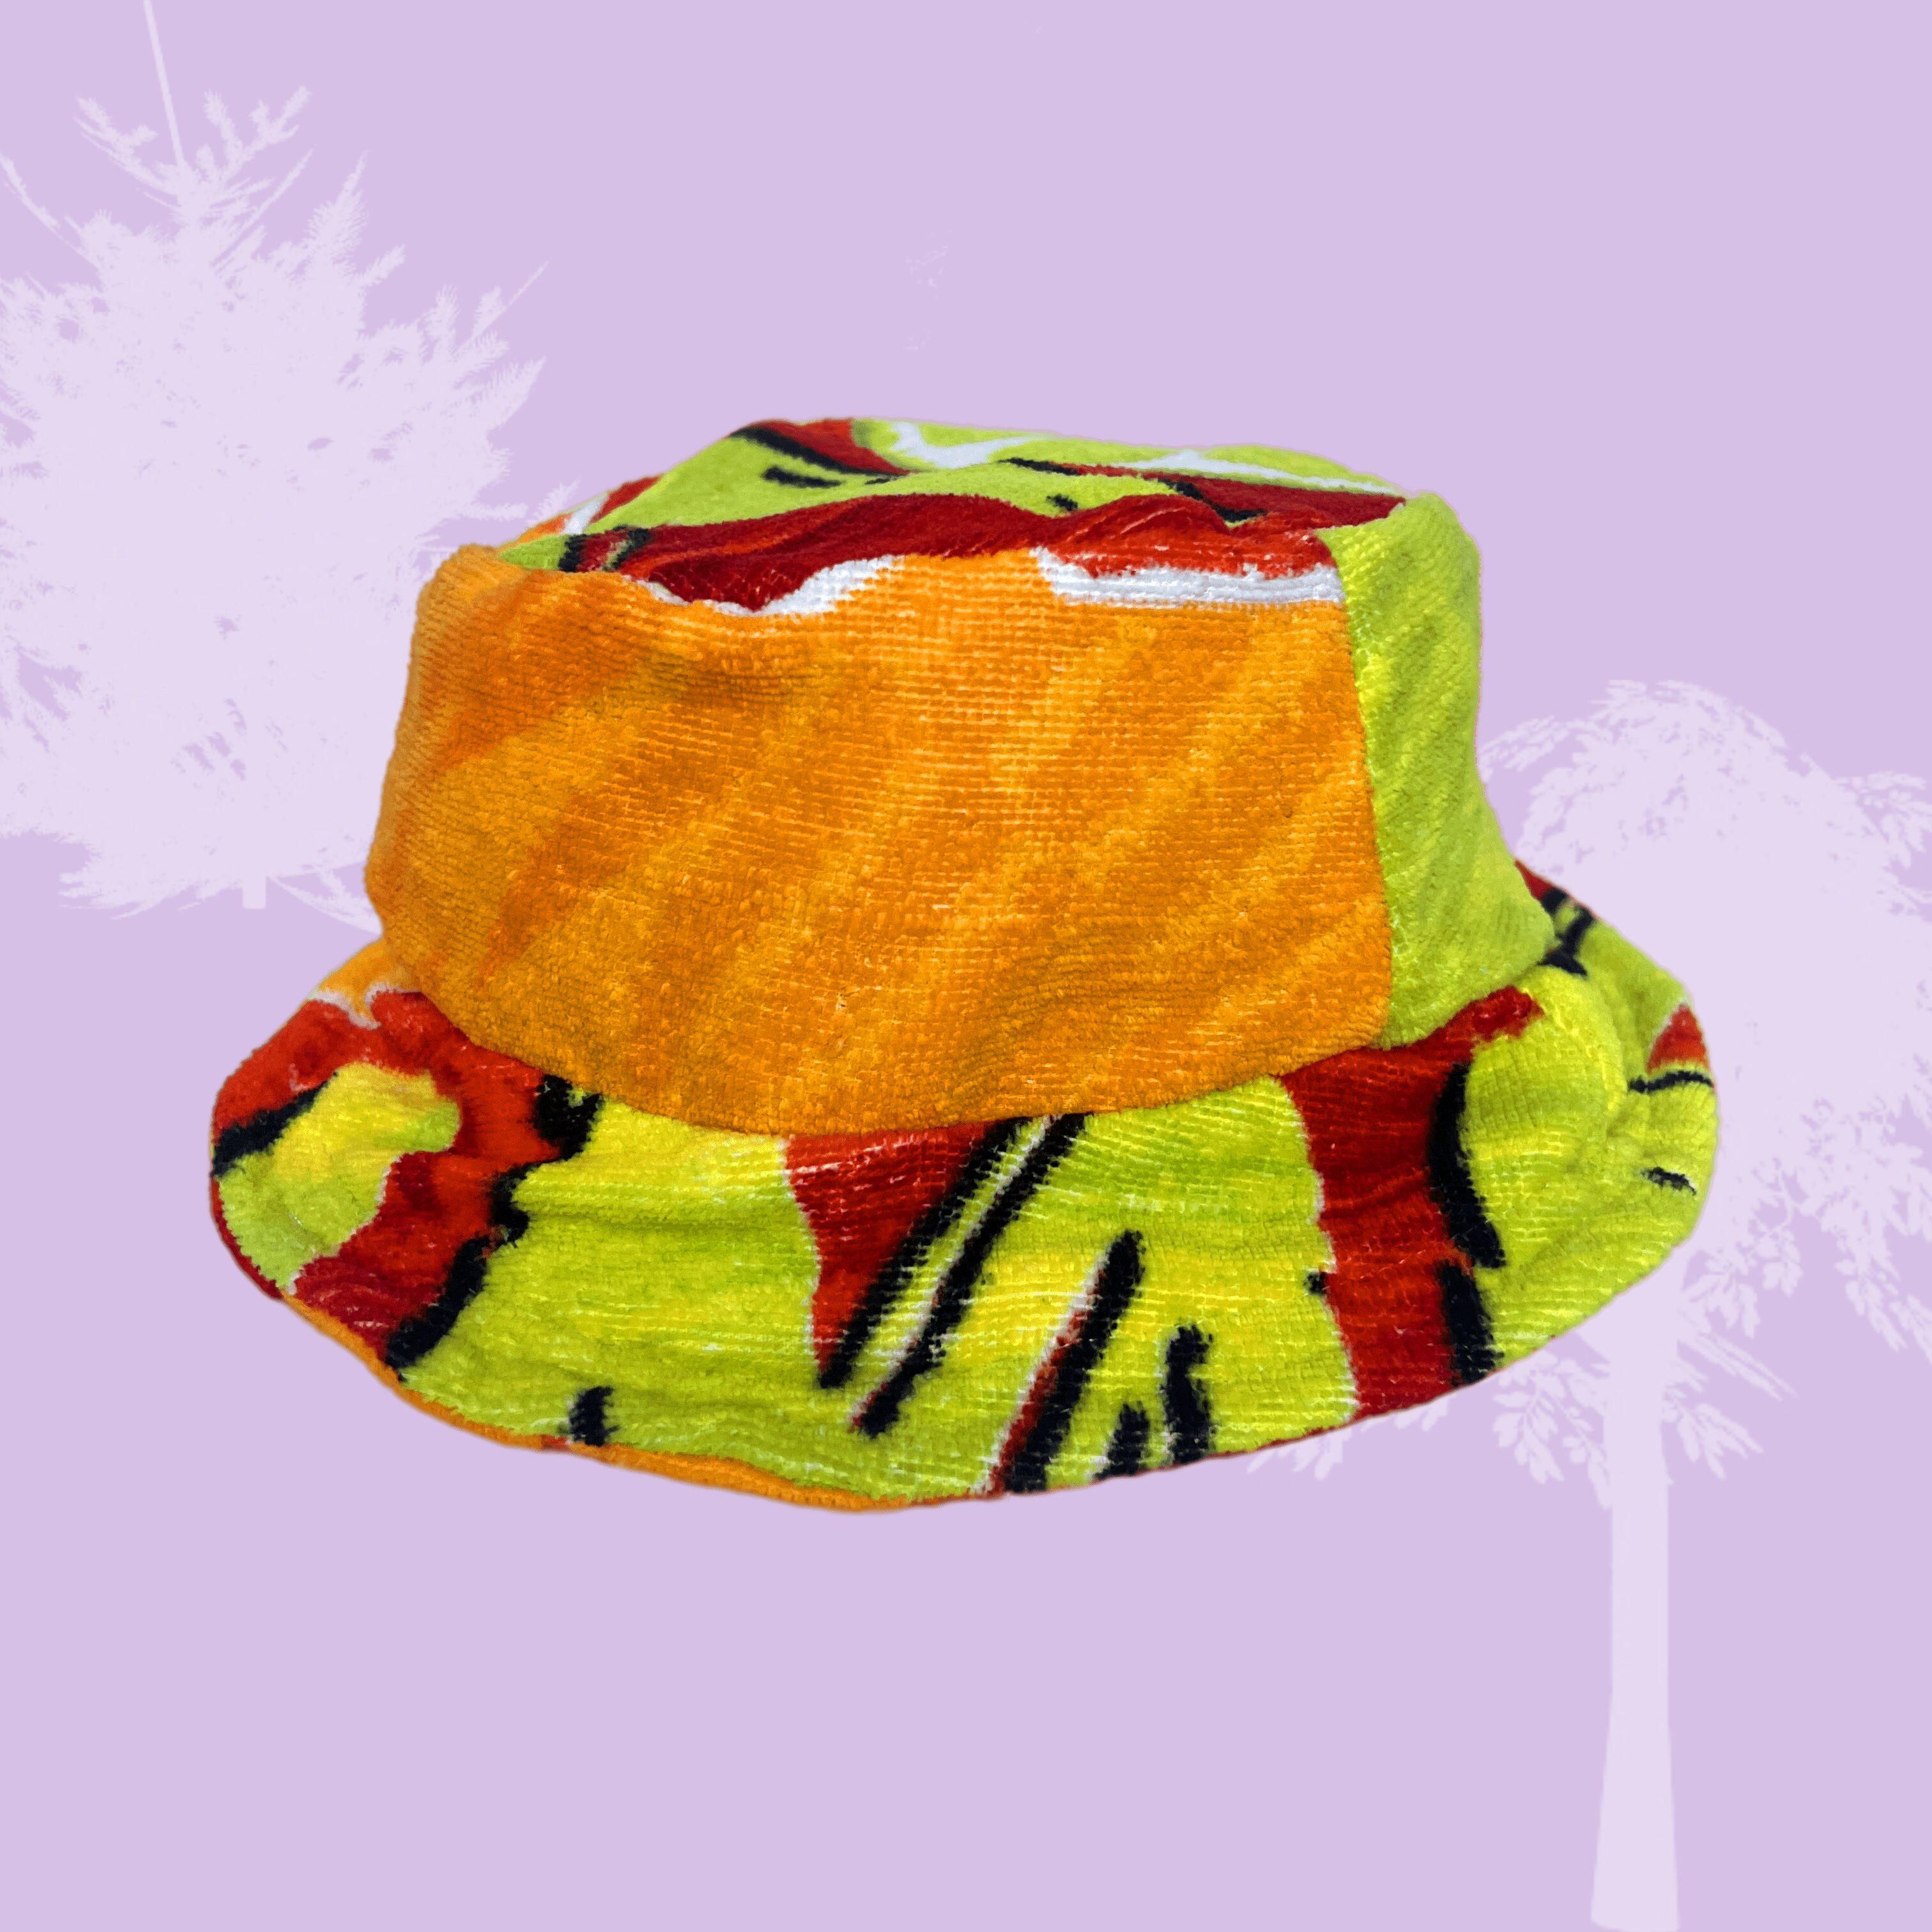 an orange and yellow bucket hat on a purple background.